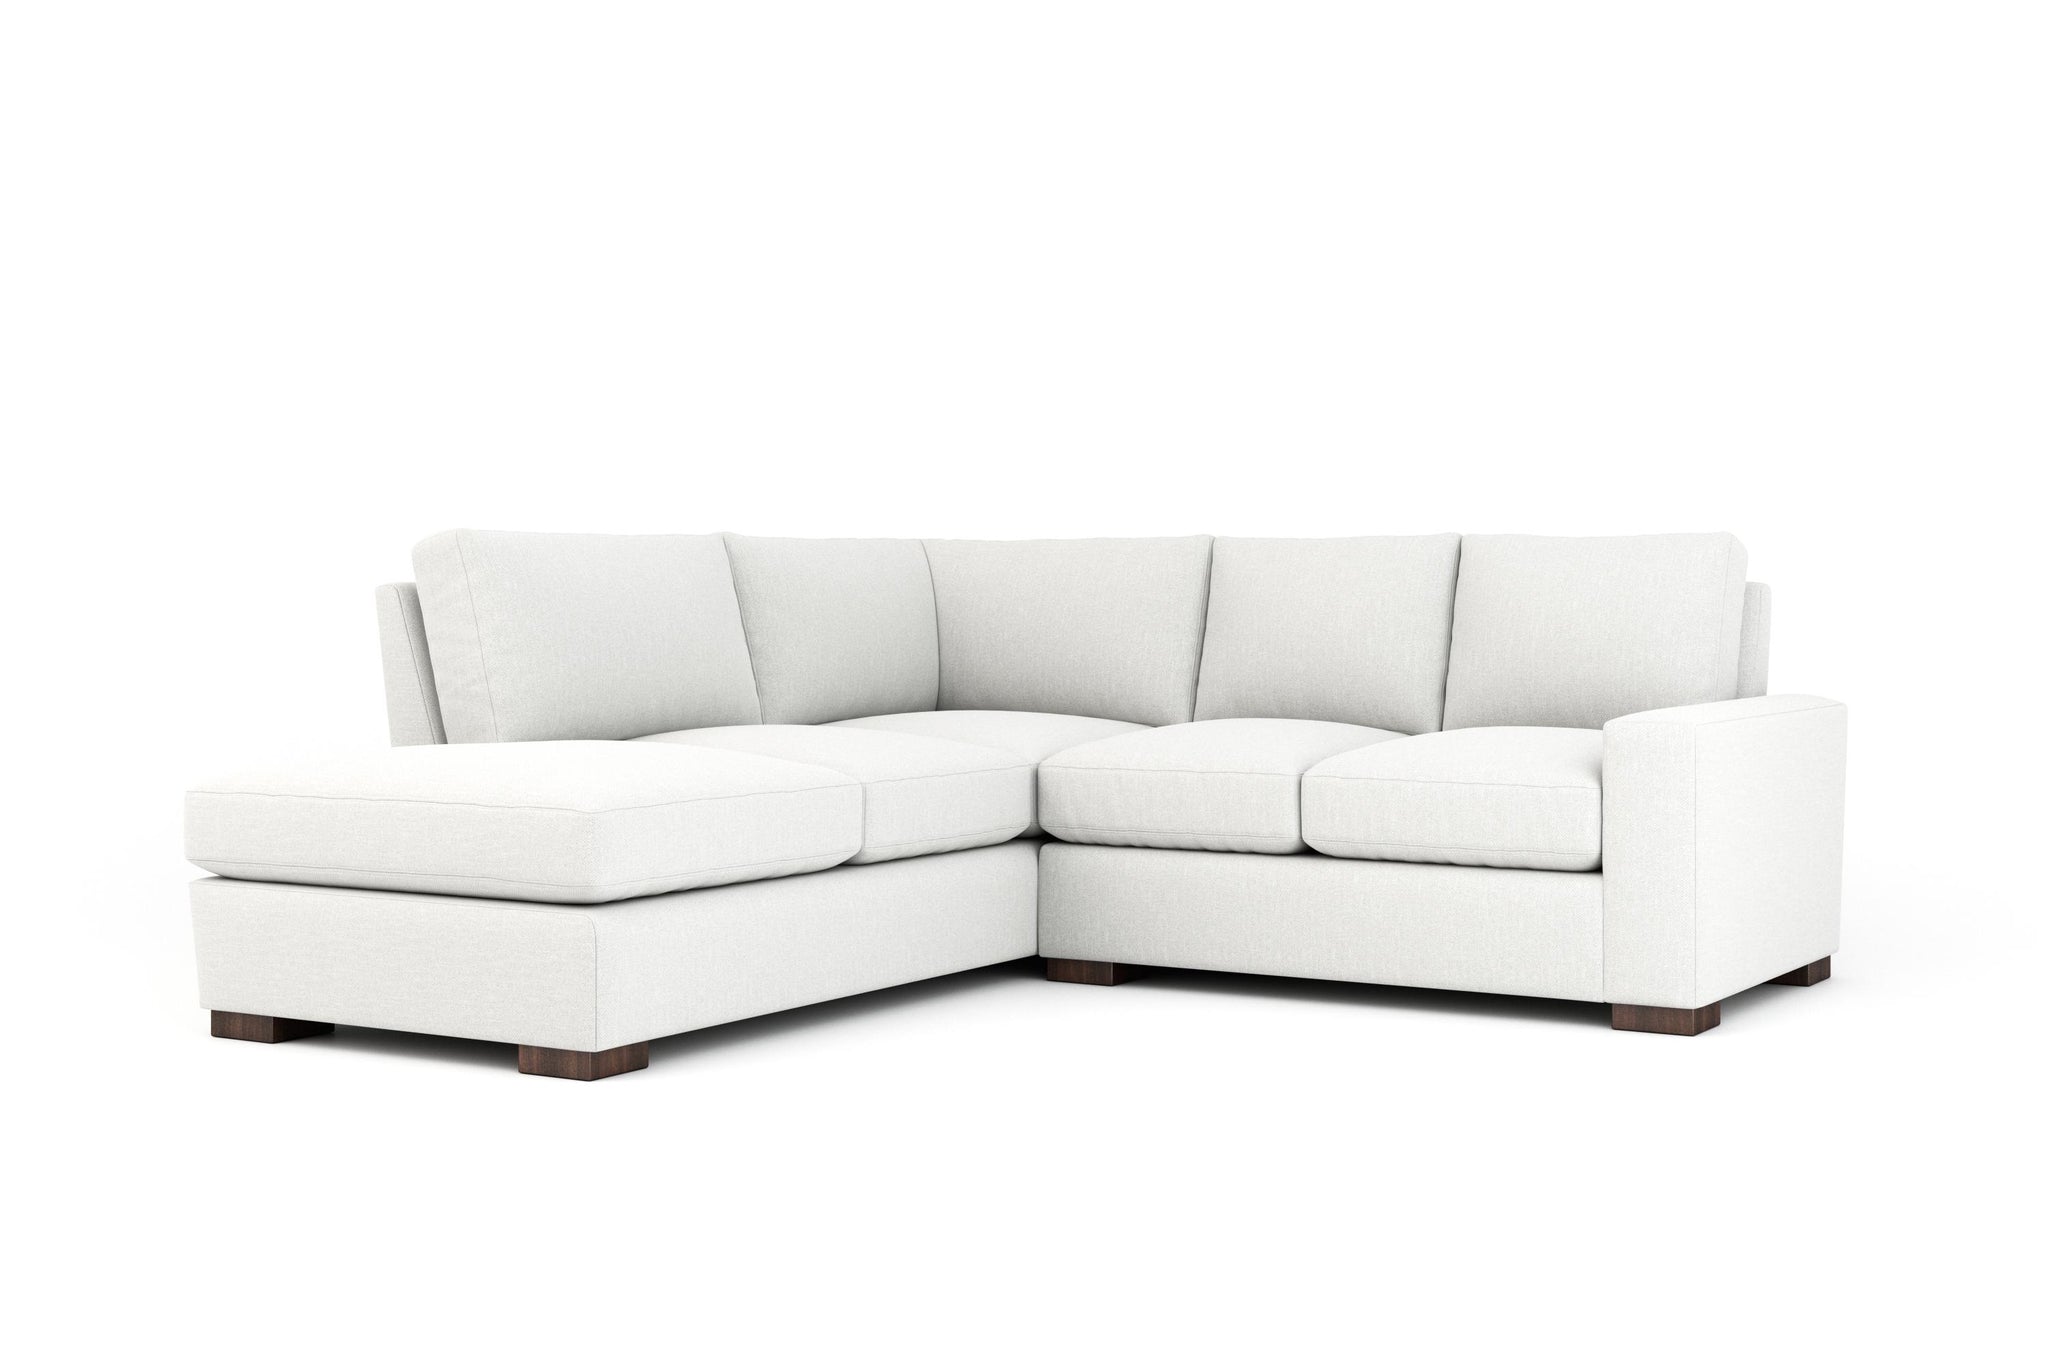 Yosemite Sectional with Bumper